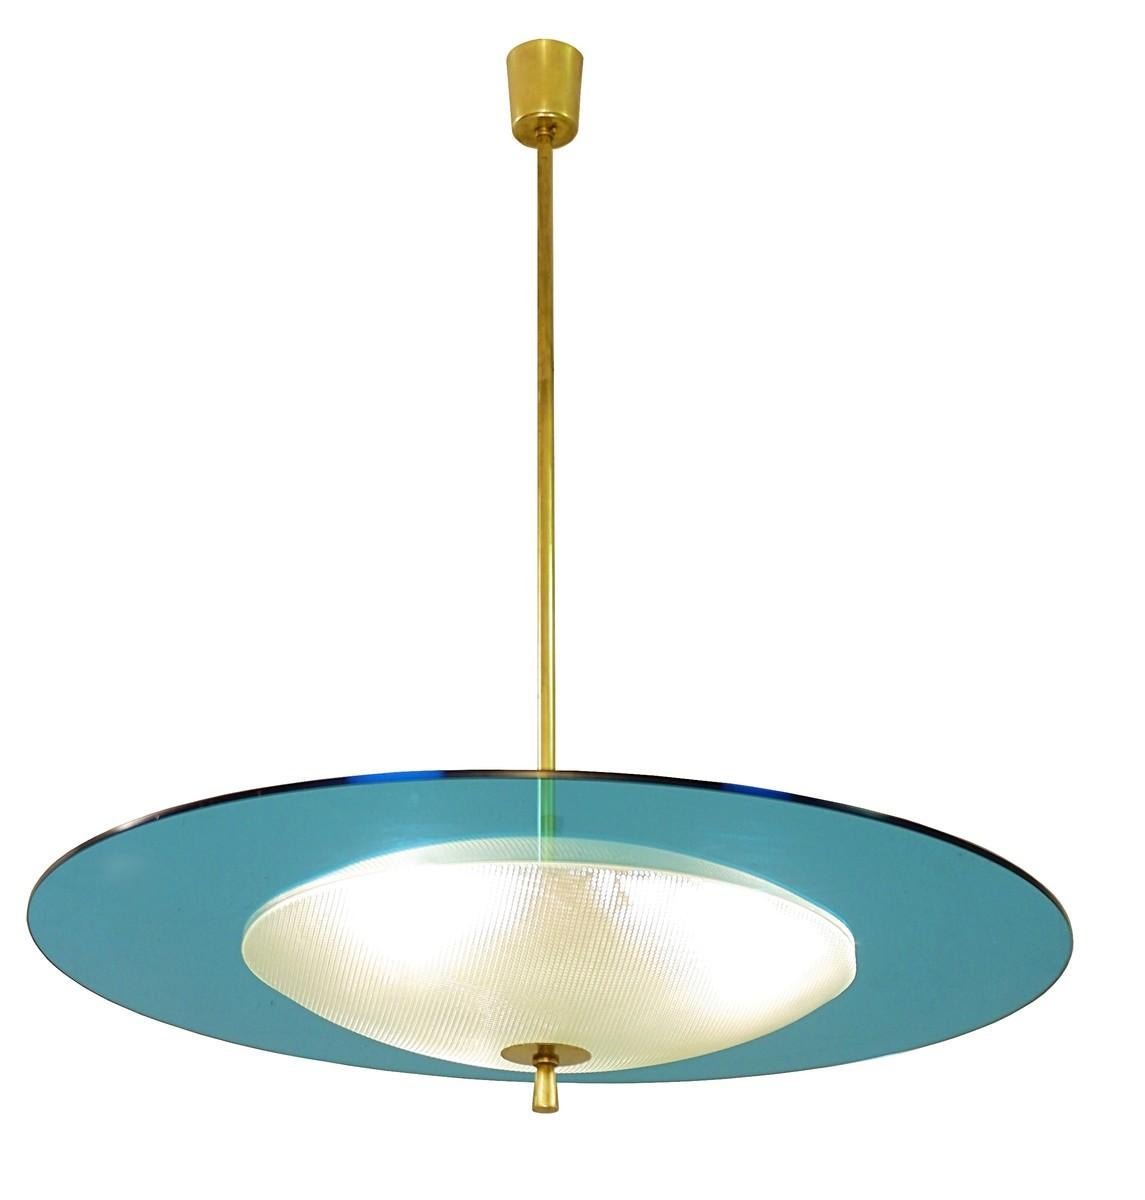 Saucer shaped chandelier in the style Fontana Arte, Italy, 1960s - A pair available
Price for one.